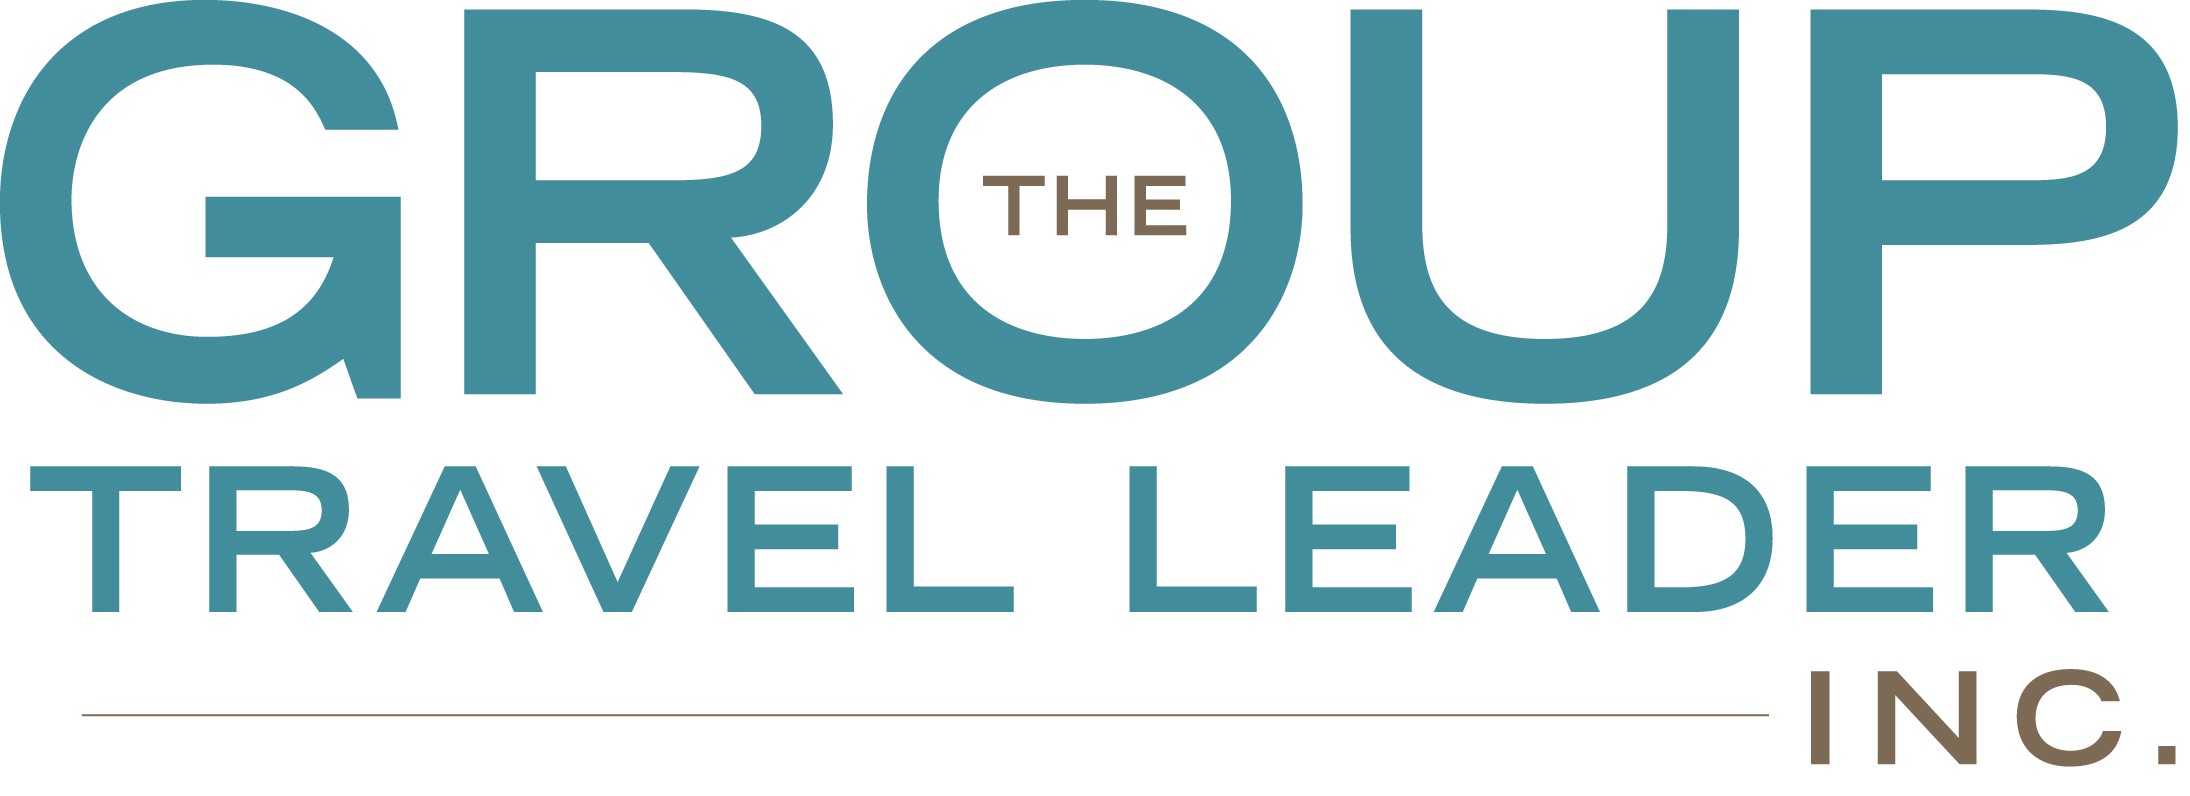 The Group Travel Leader Inc.